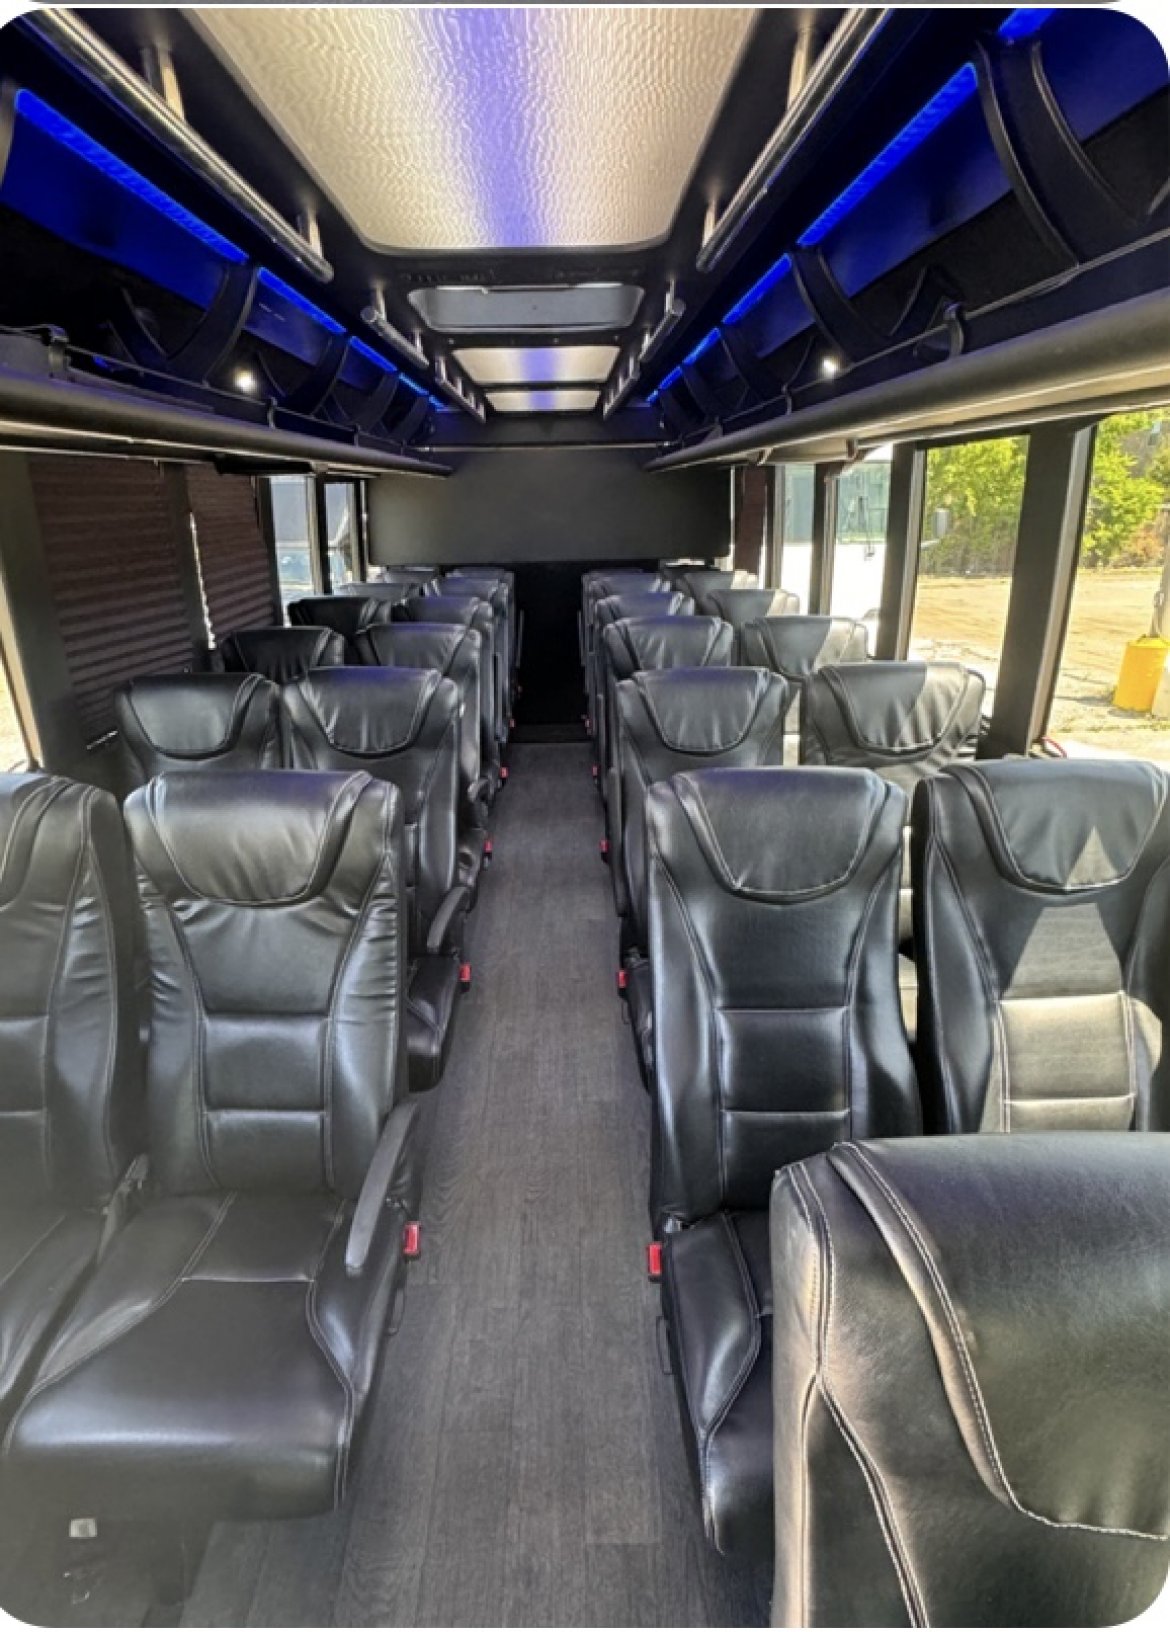 Executive Shuttle for sale: 2018 Ford Ford F550 by Ford F550